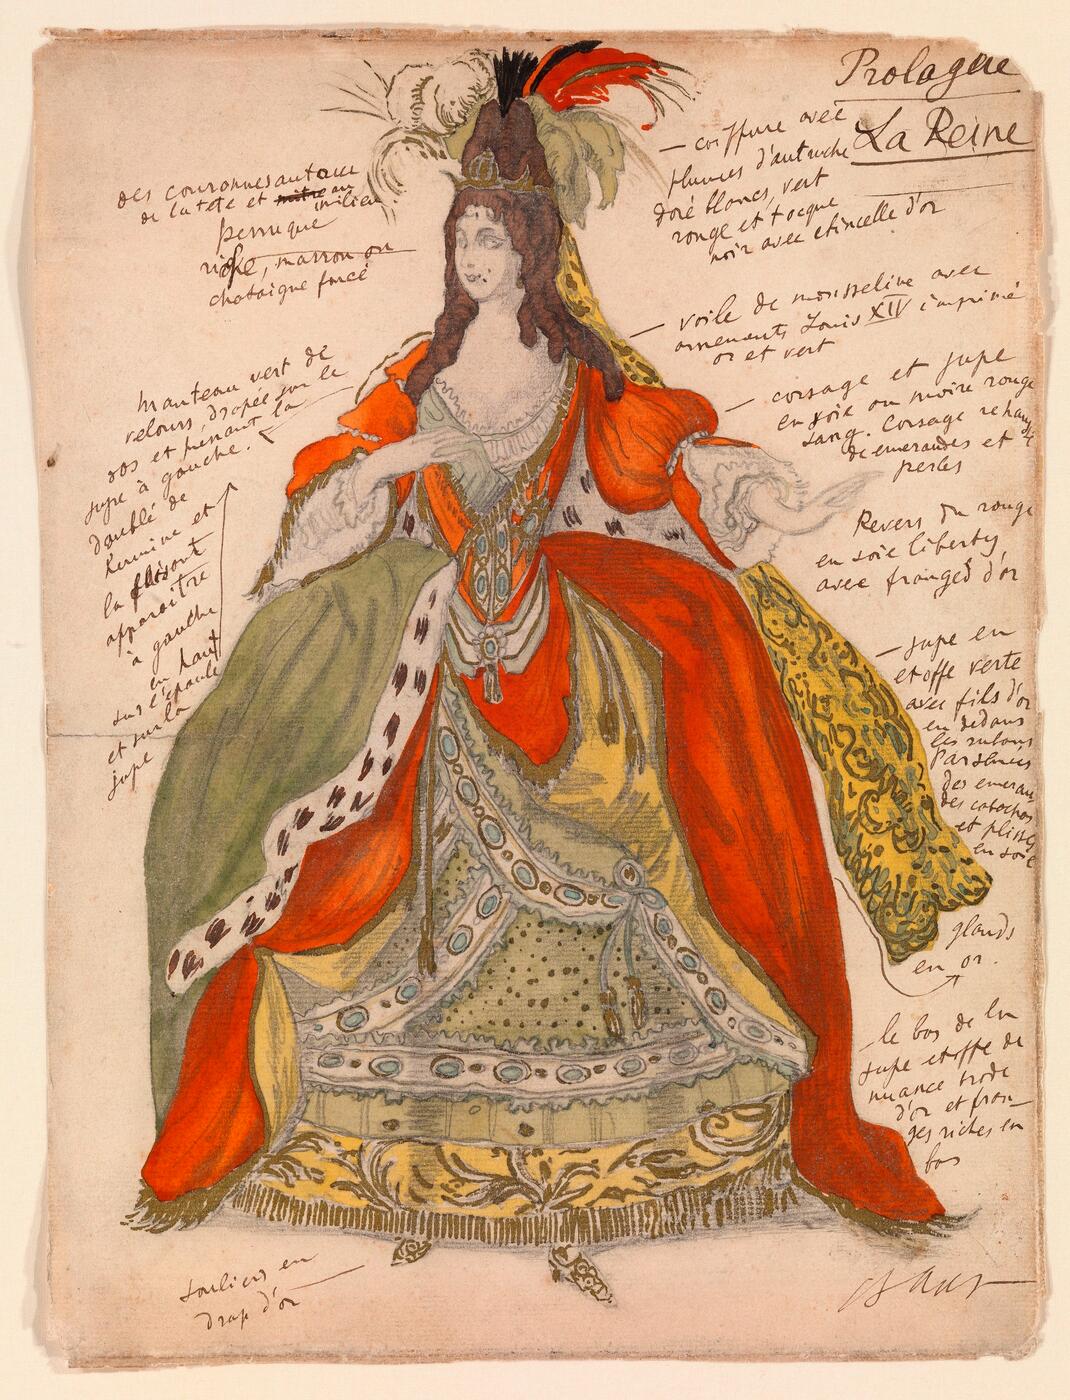 Costume Design for the Queen from "Sleeping Beauty"